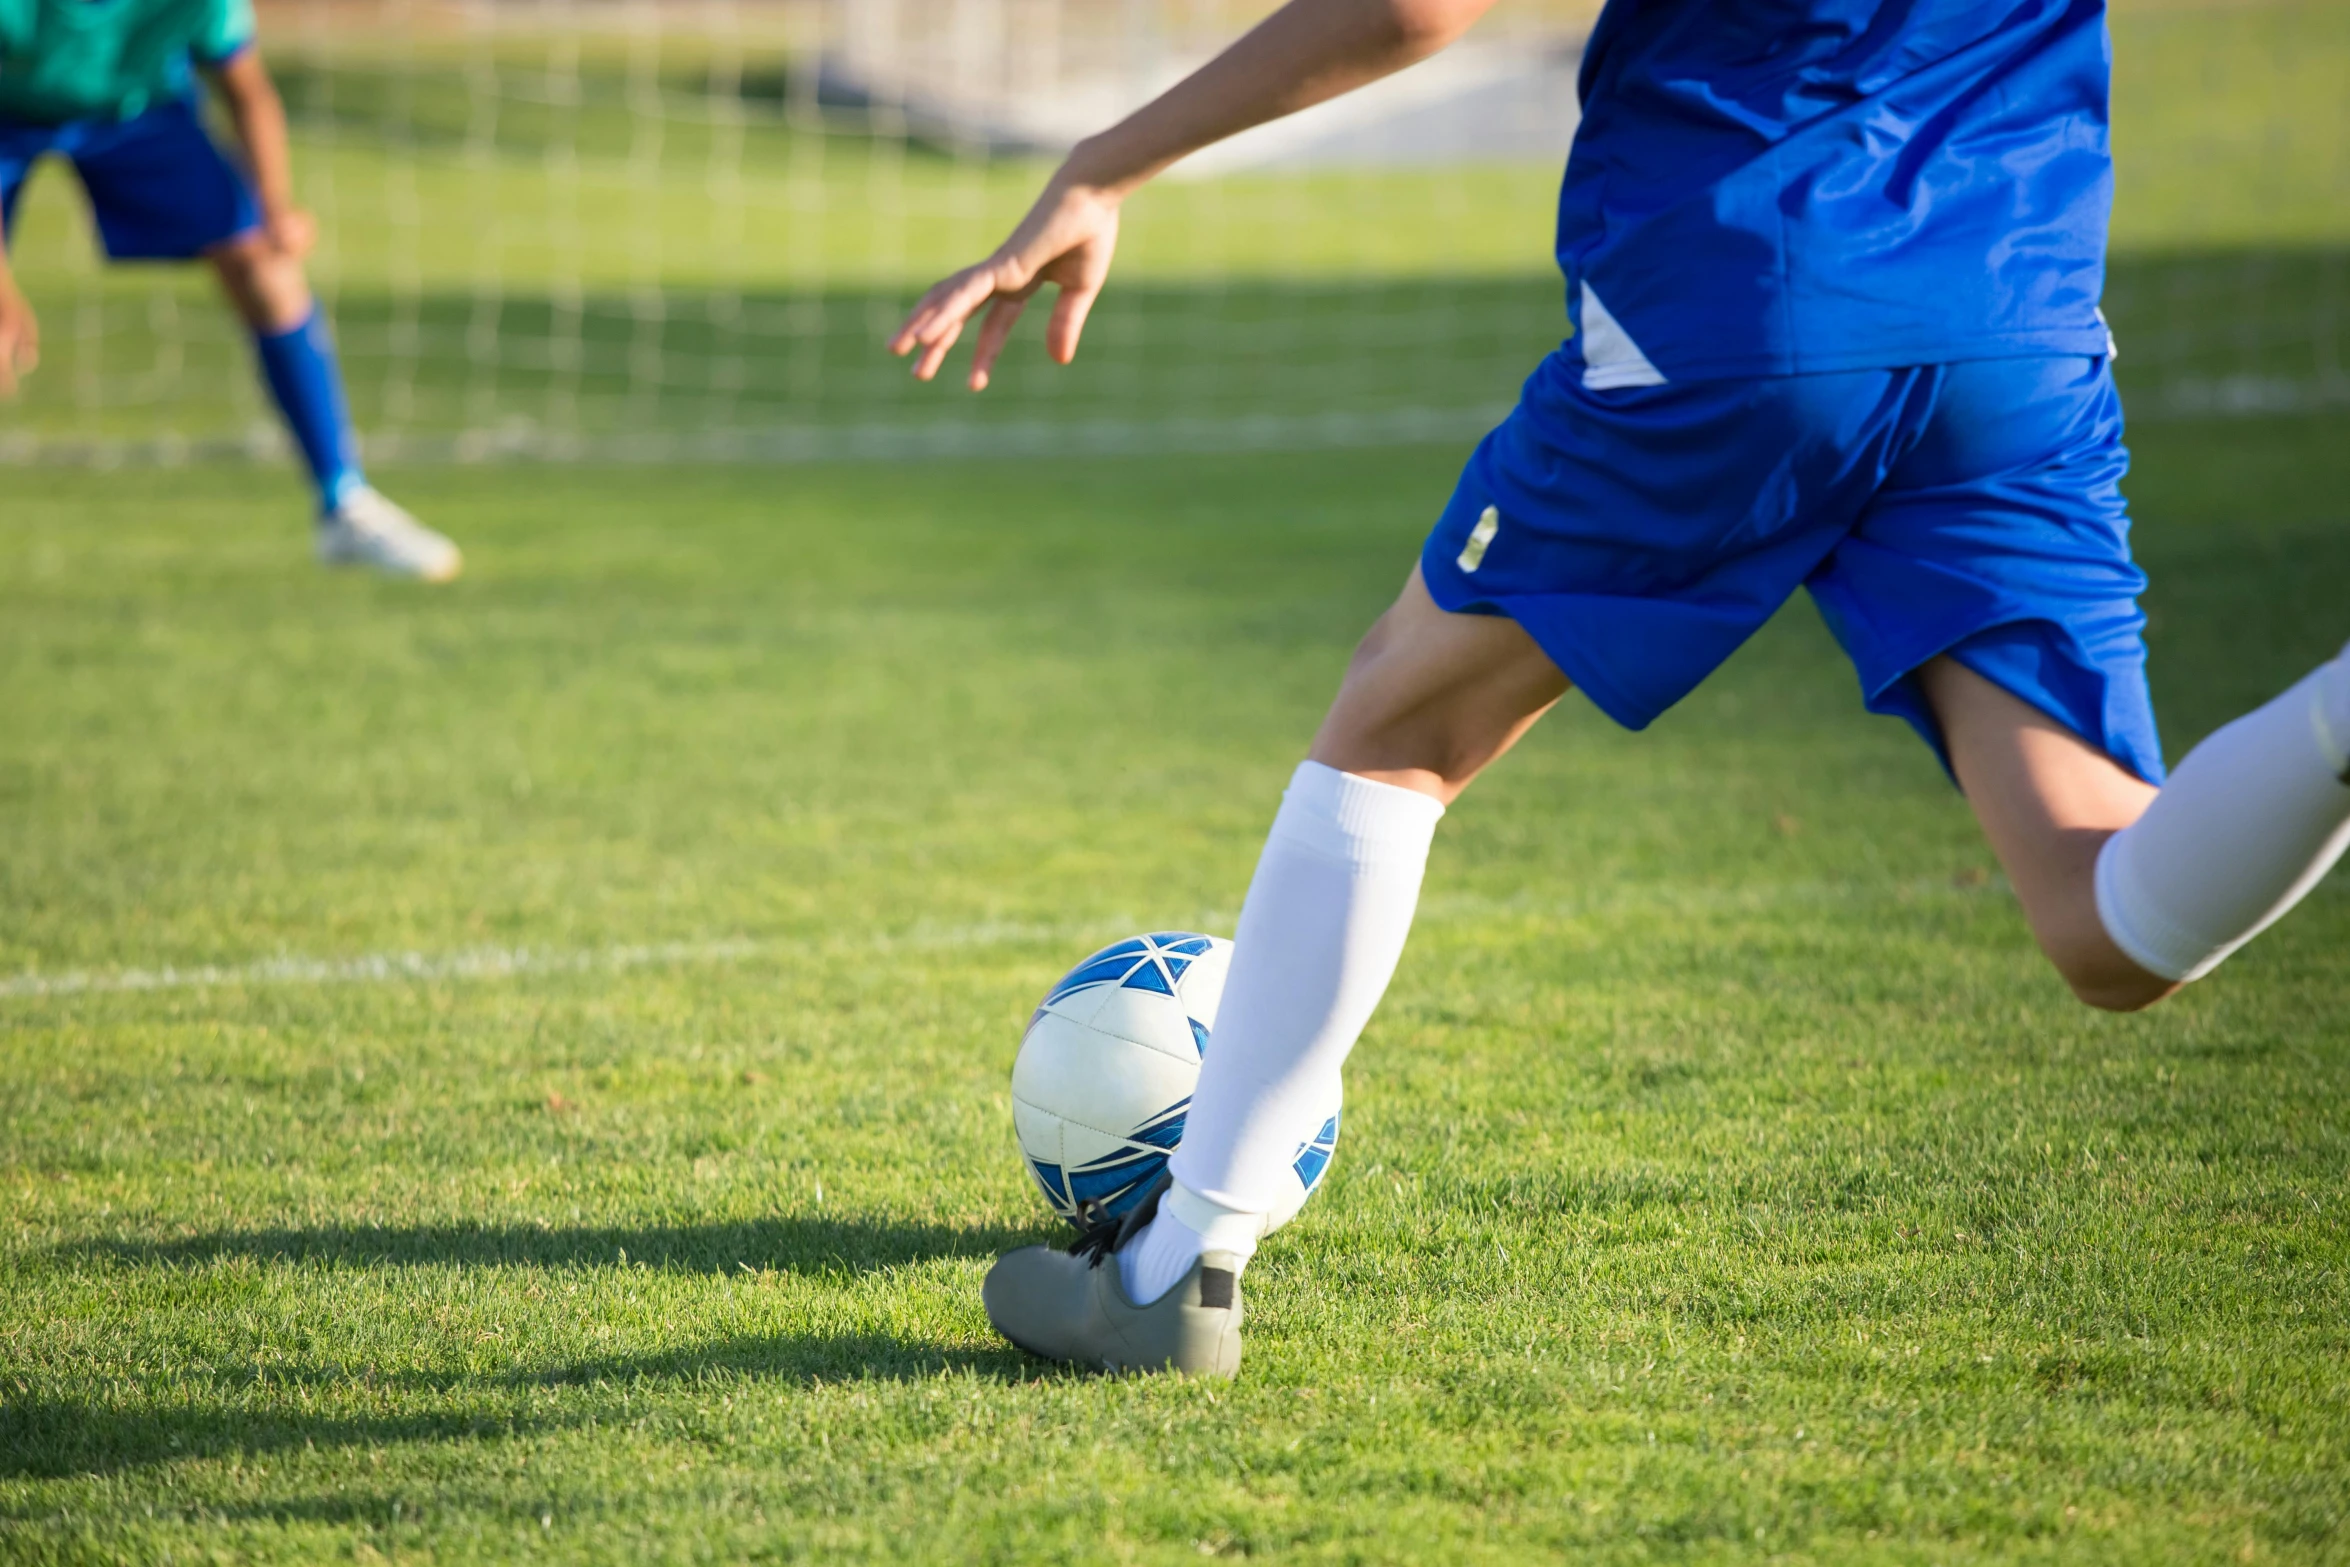 a person kicking a soccer ball on a field, profile image, fan favorite, sports clothing, rectangle